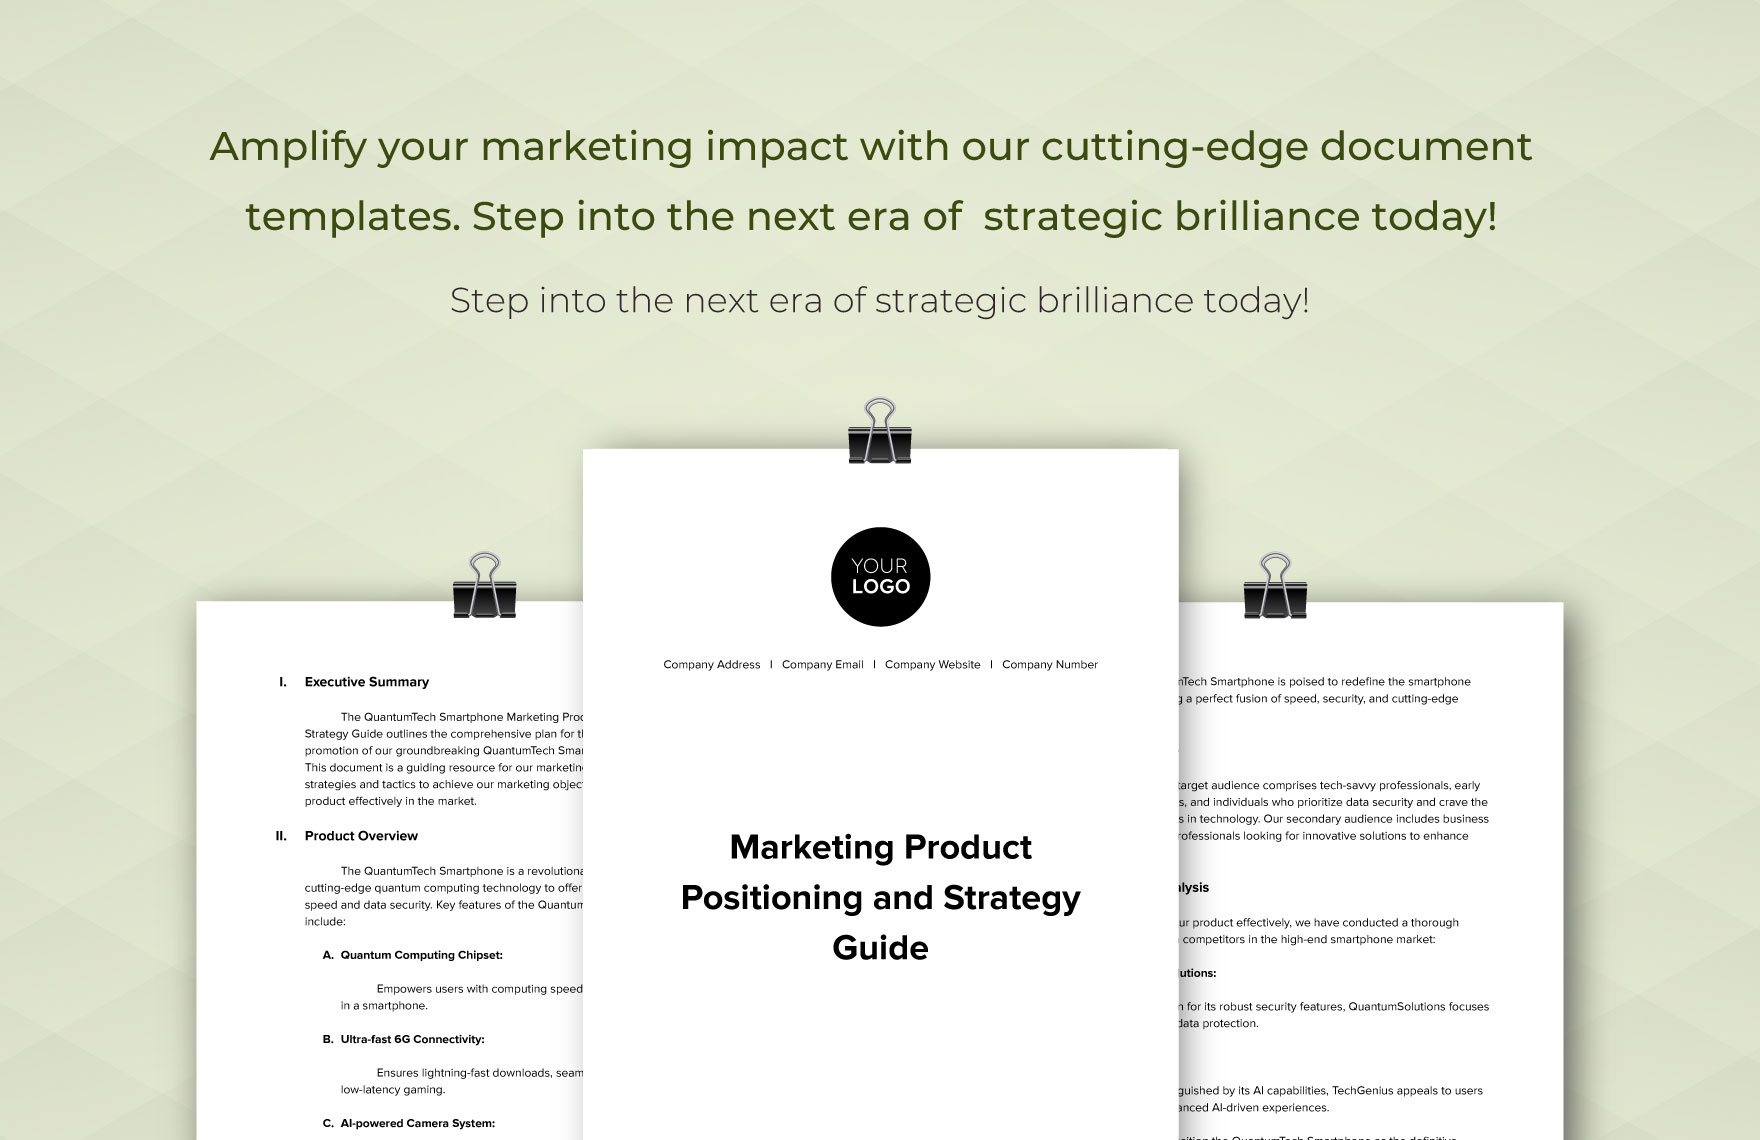 Marketing Product Positioning and Strategy Guide Template